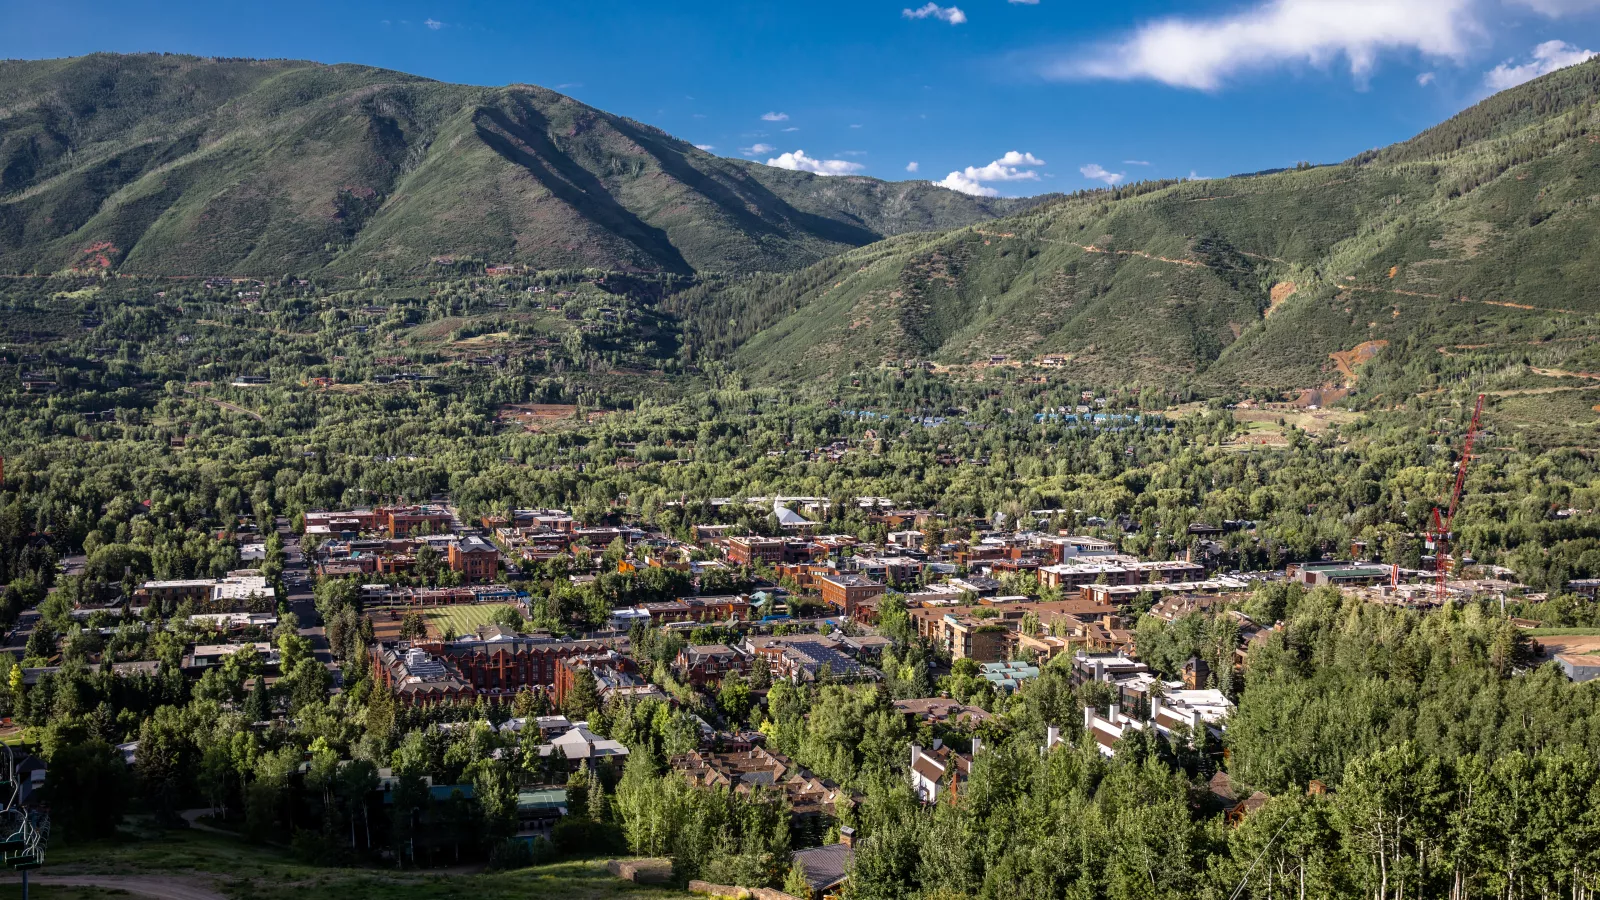 City Cheat Sheet: A Travel Guide for Aspen, Colorado - The Scout Guide